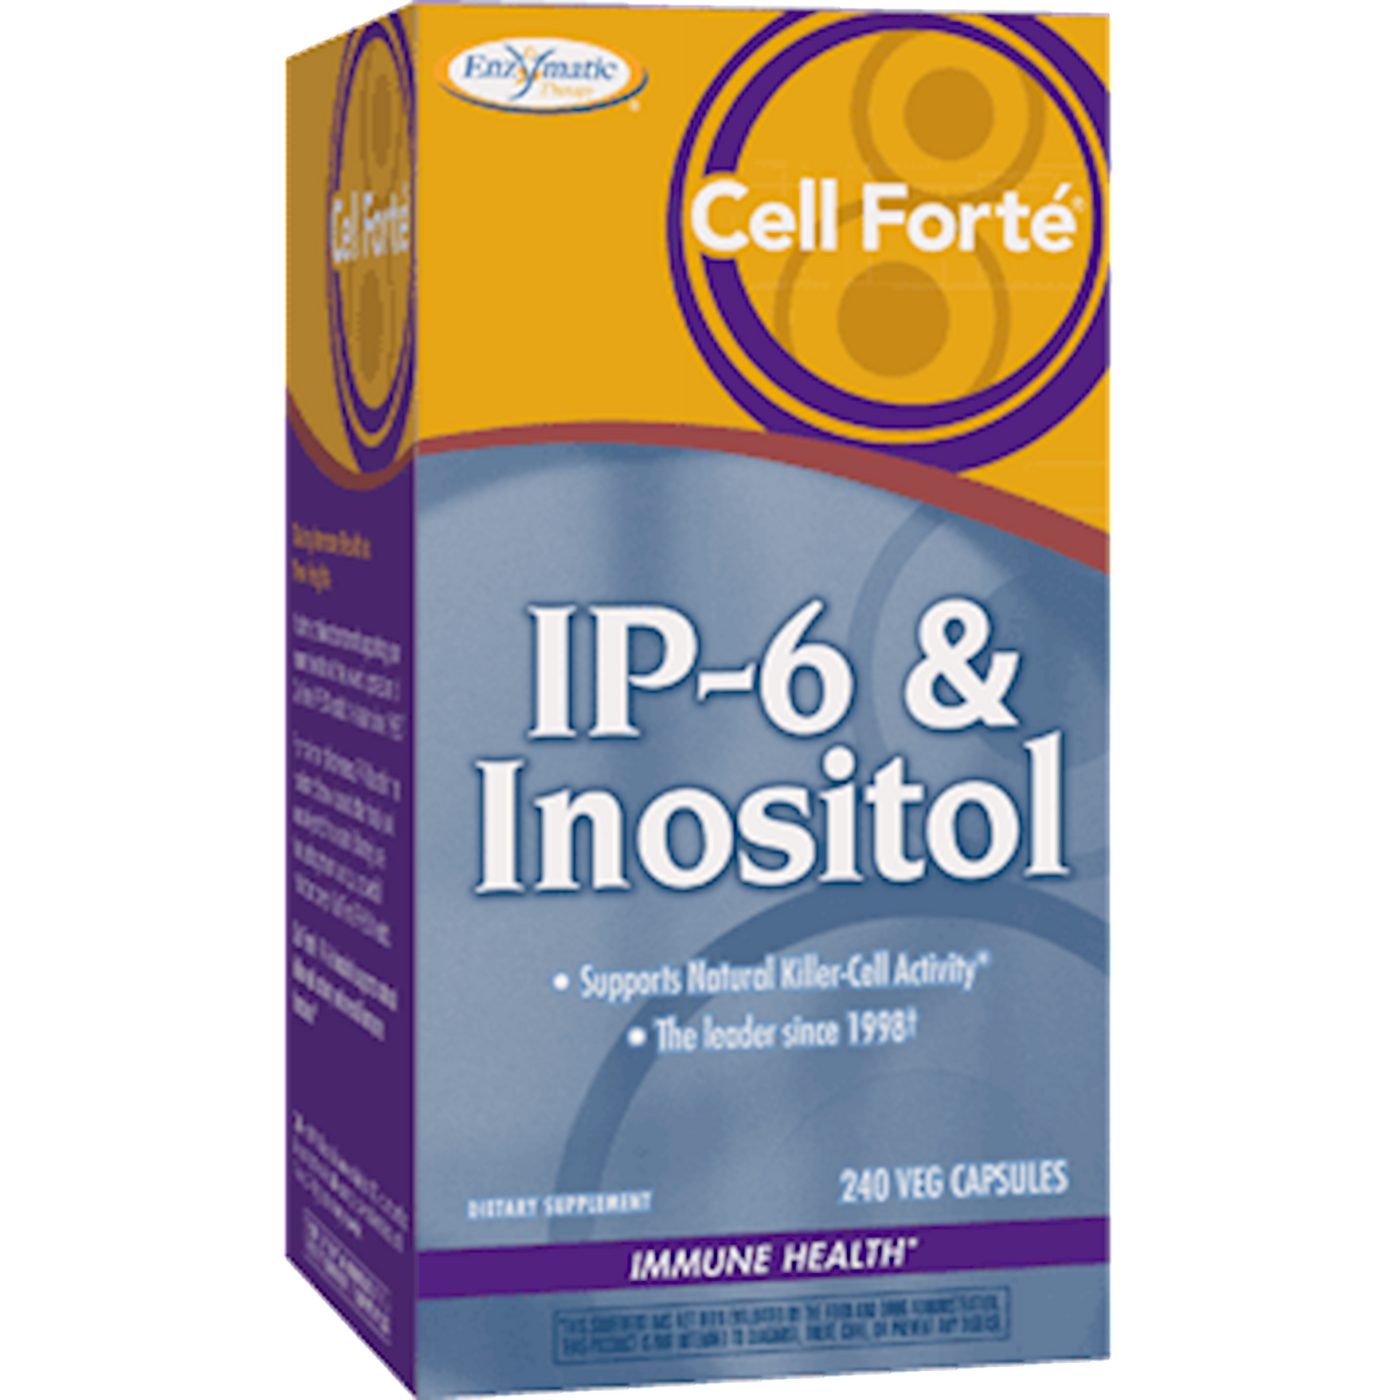 Cell Forté IP-6 & Inositol  Curated Wellness